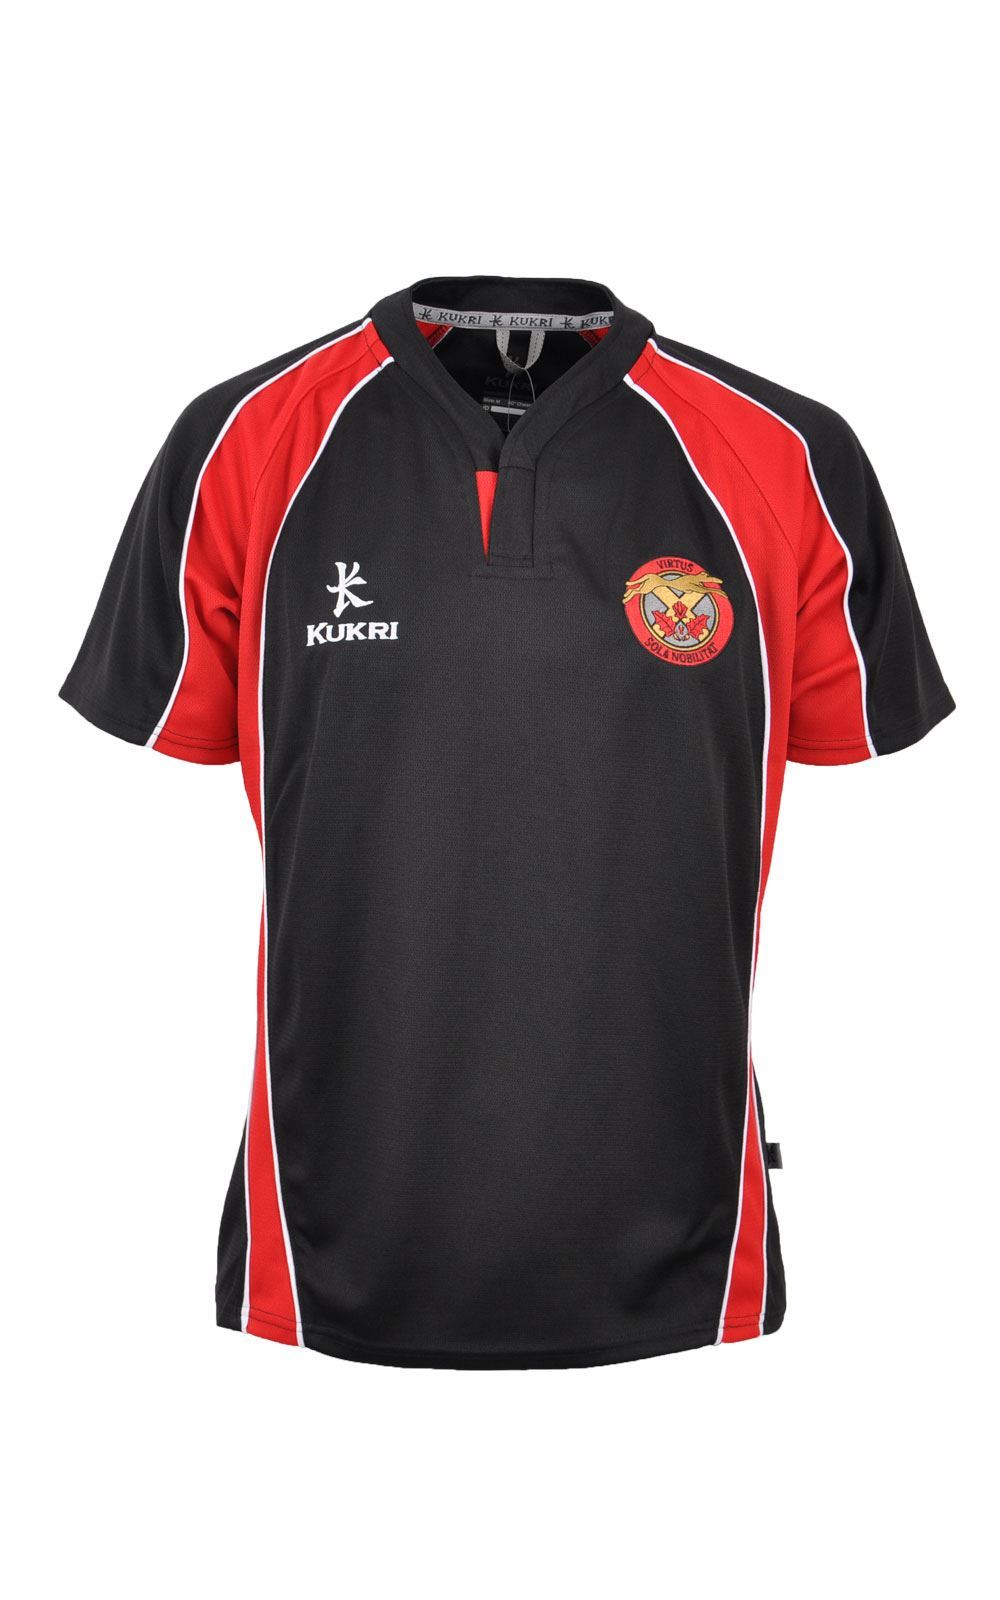 Picture of Limavady HS Rugby Top - Kukri